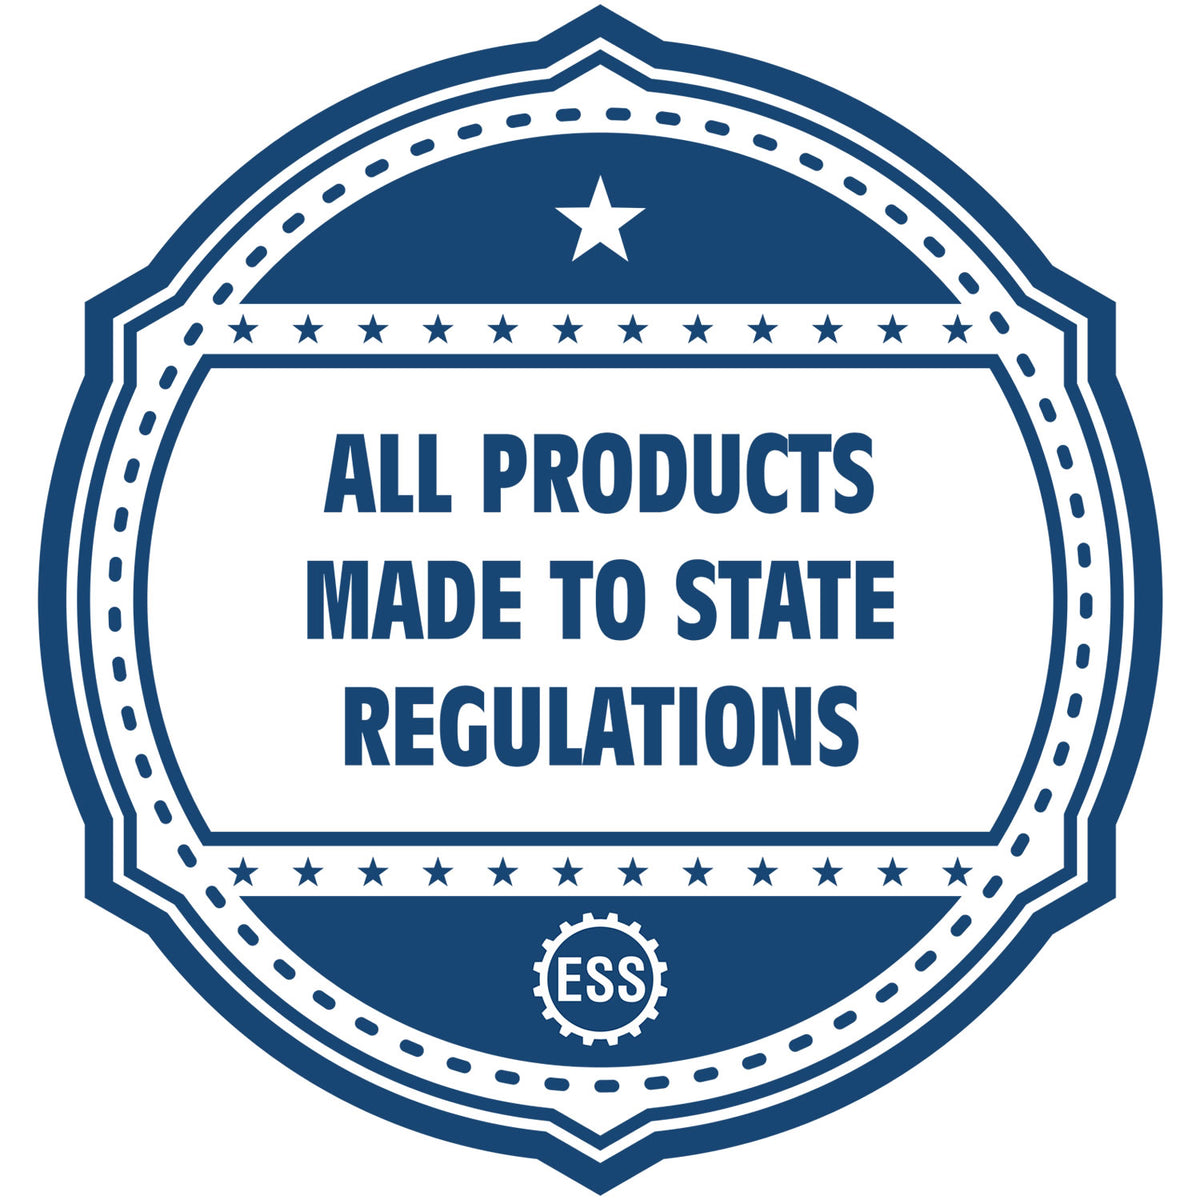 An icon or badge element for the State of Michigan Architectural Seal Embosser showing that this product is made in compliance with state regulations.